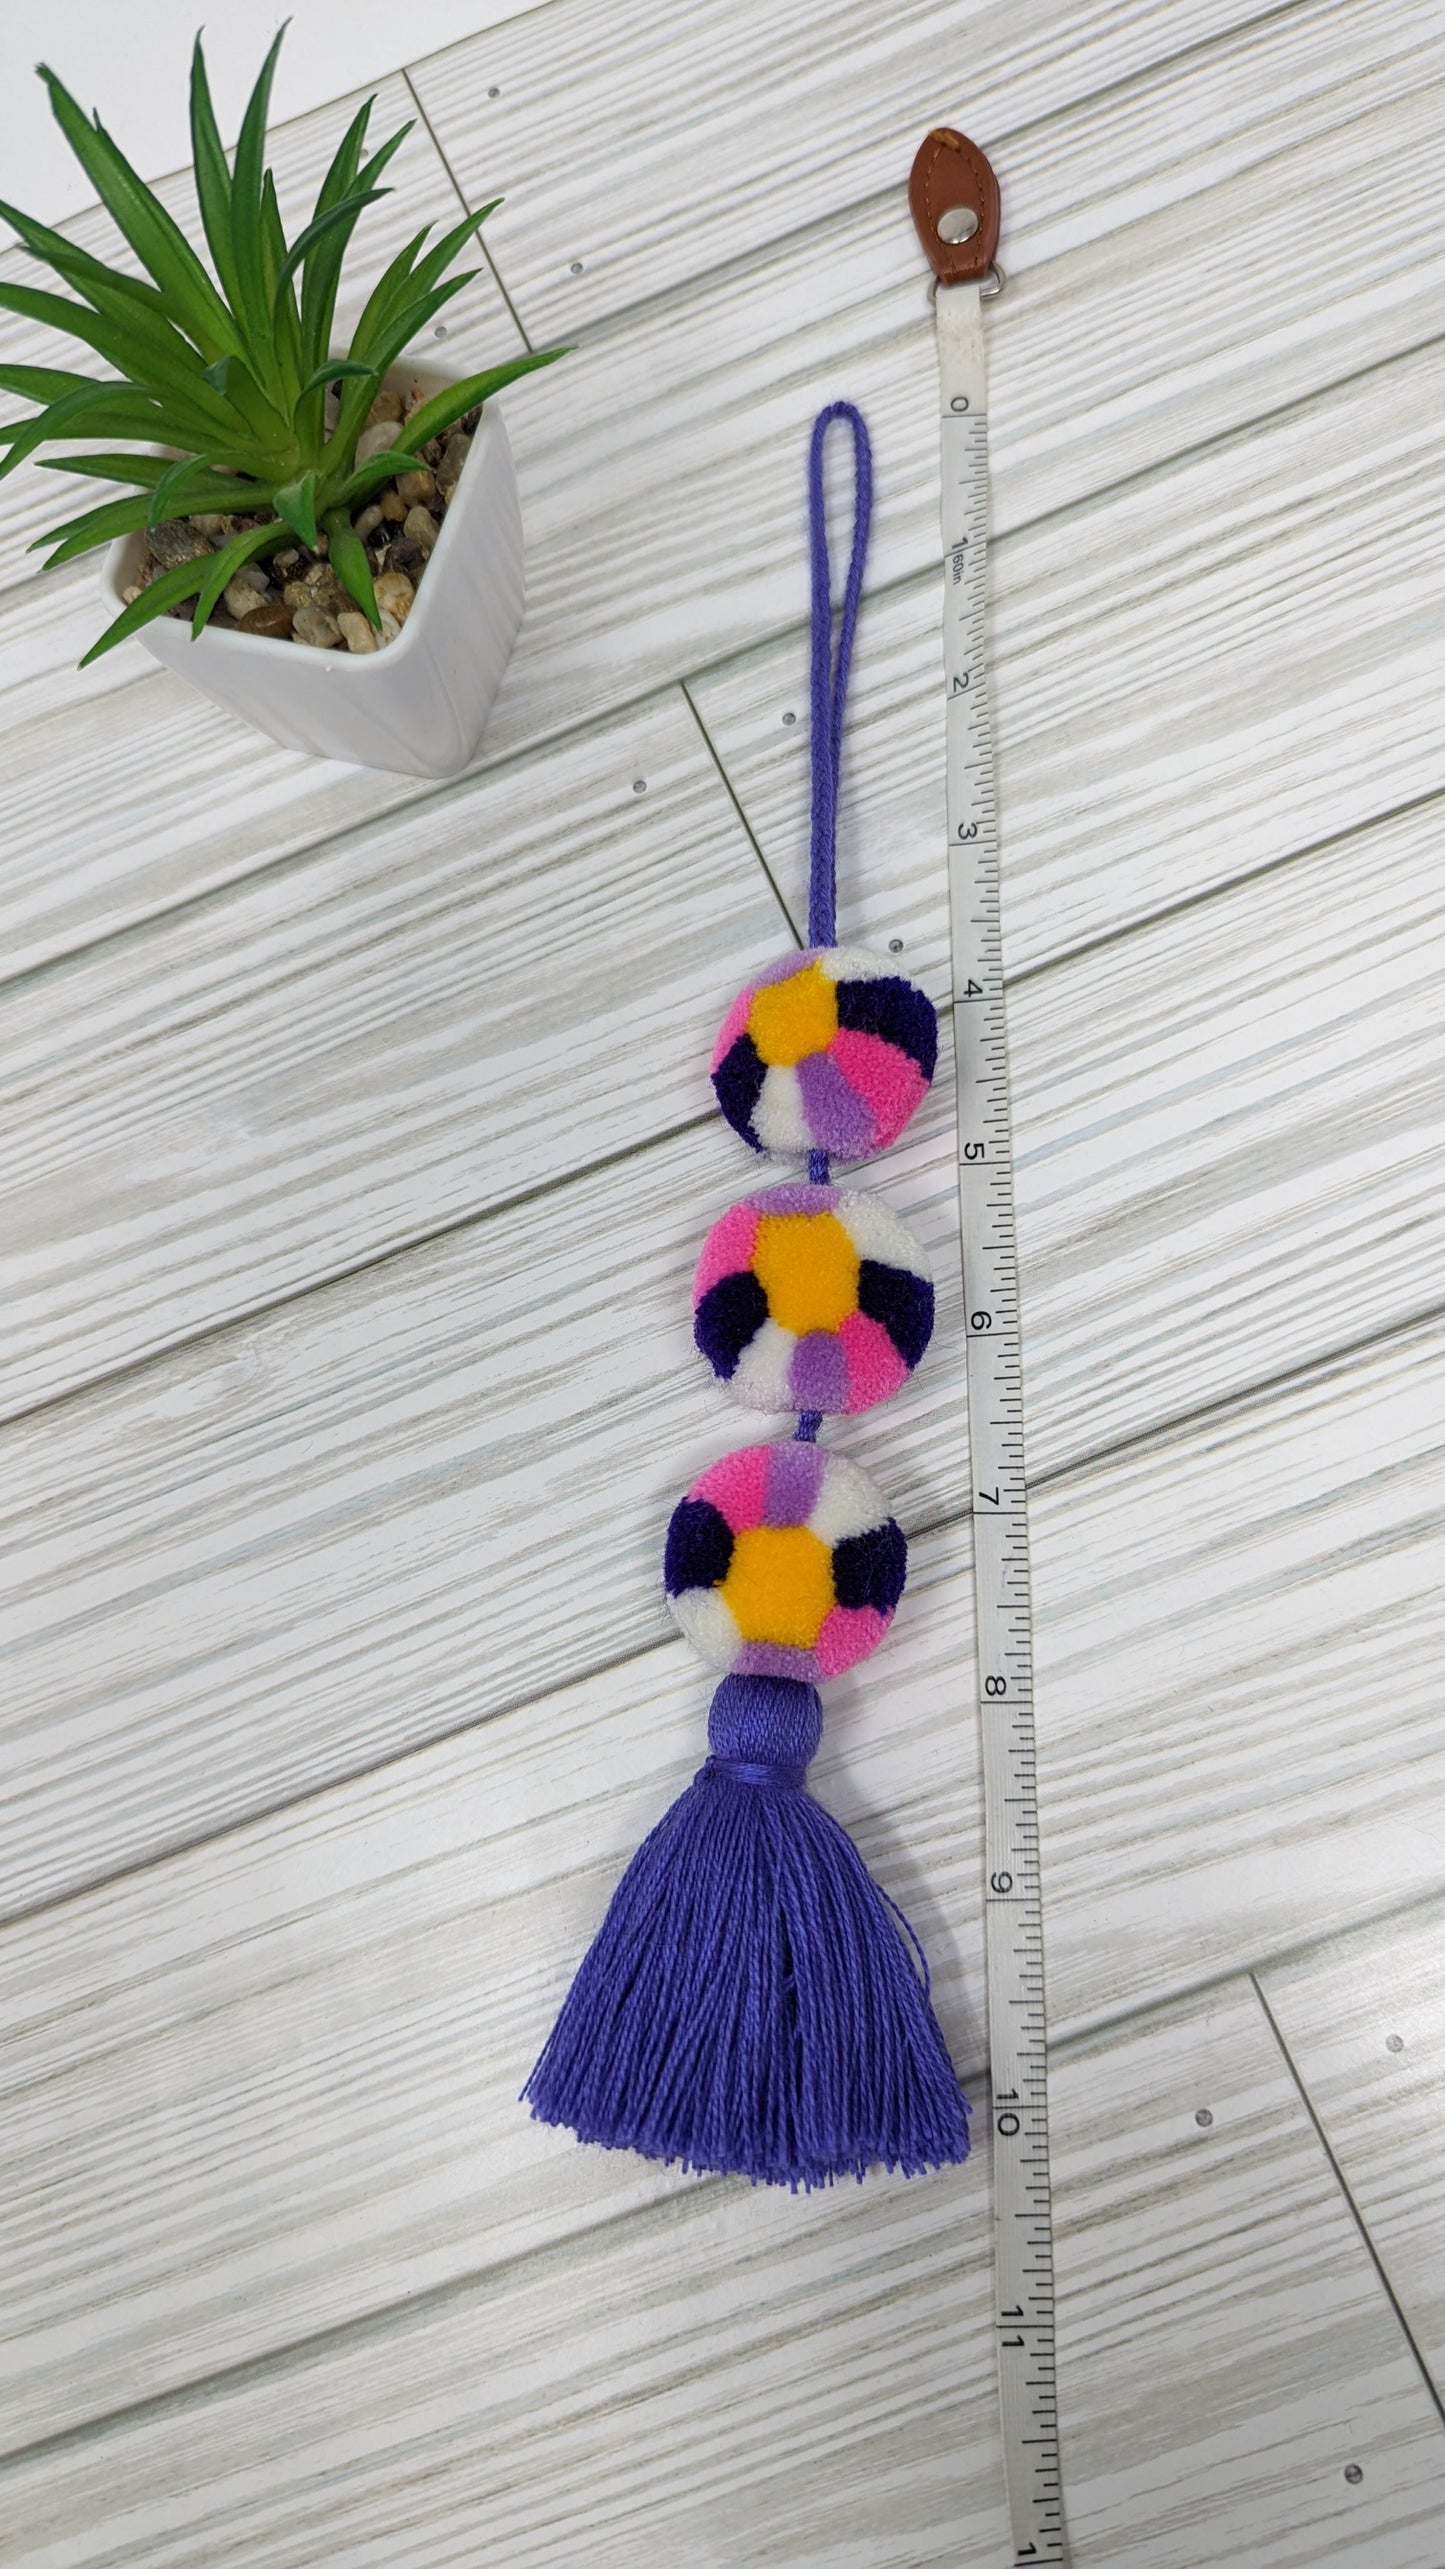 Guatemalan Artisan Pom Pom Tassel Decoration Charm for Bags, rear mirror, keychains and more